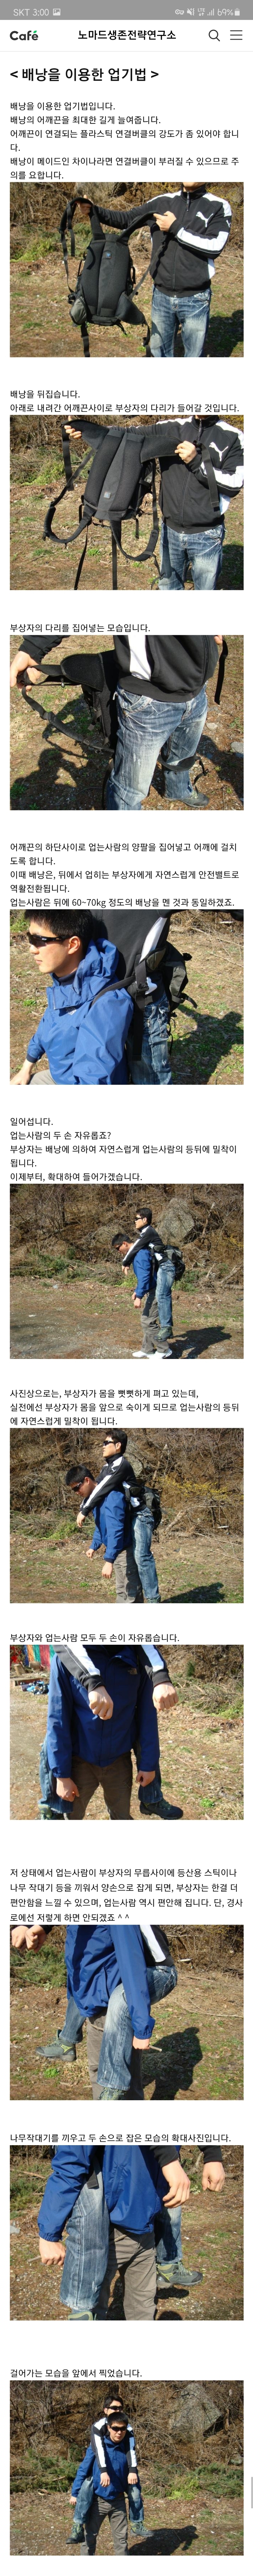 How to carry an injured hiker down the mountain road for an hour.jpg